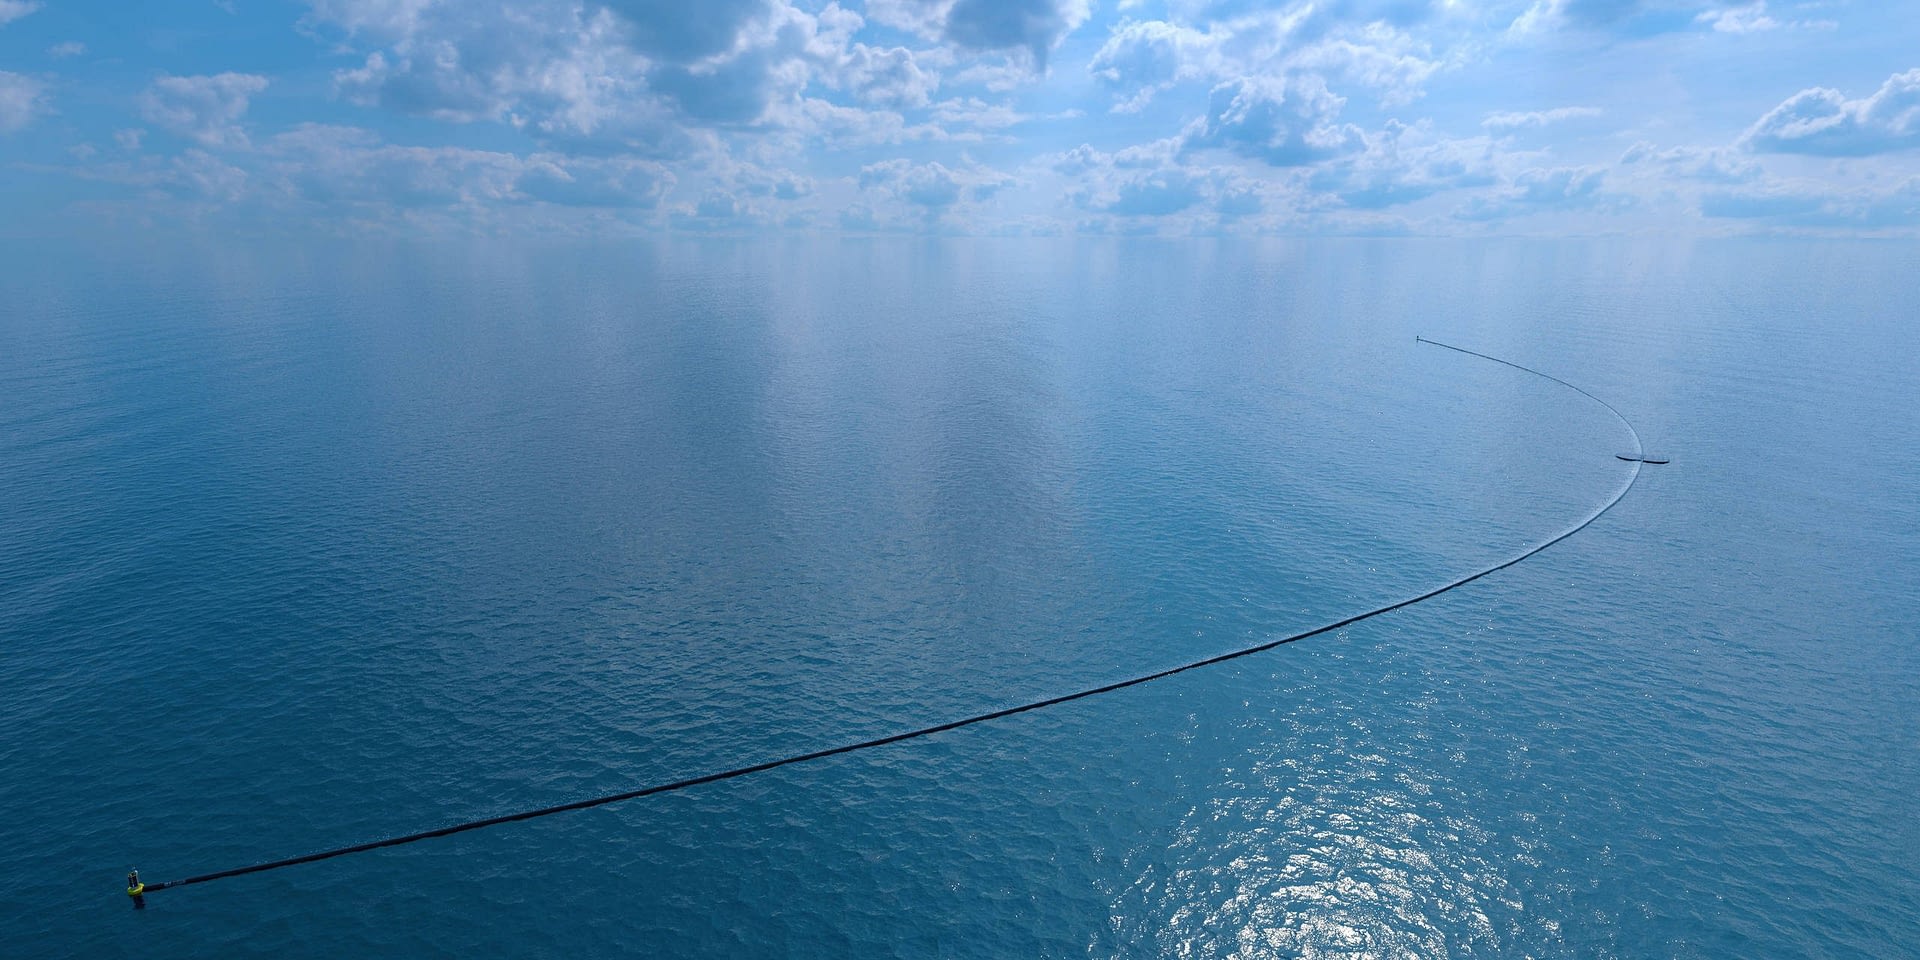 Image: Artists rendering of the Ocean Cleanup booms from the air